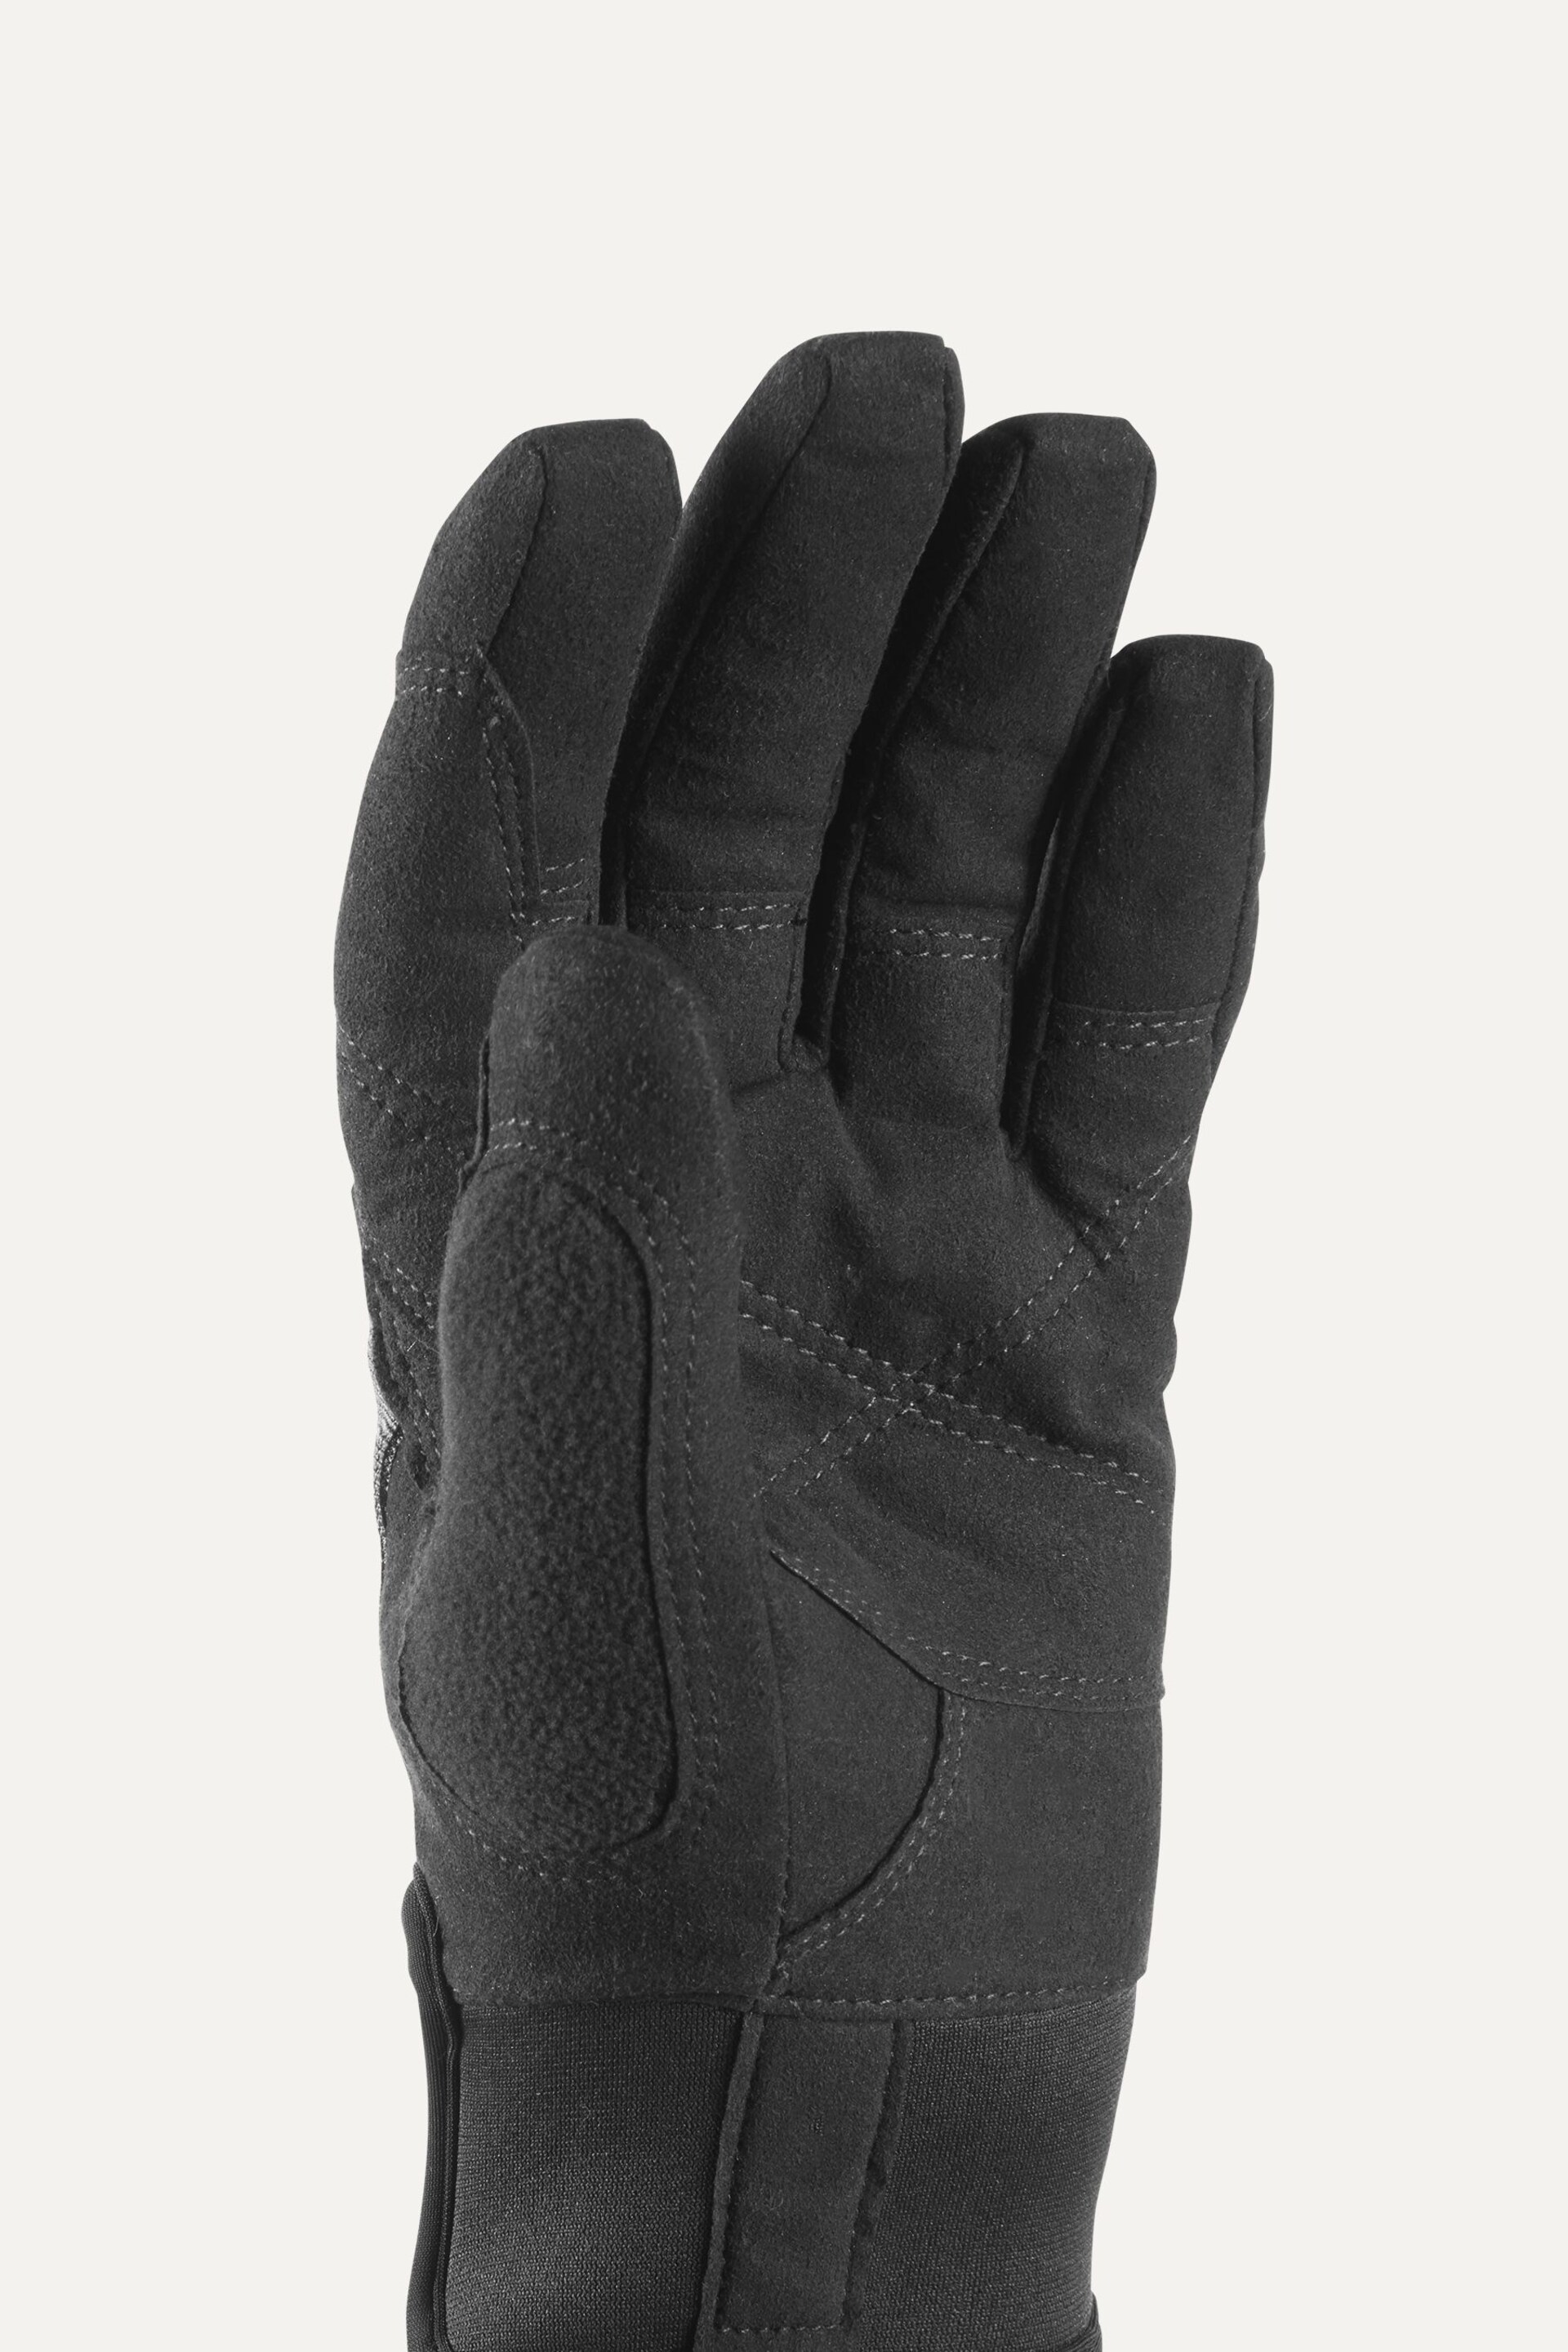 Sealskinz Bodham Women{Sq}S Black Waterproof All Weather Cycle Gloves - Image 2 of 3